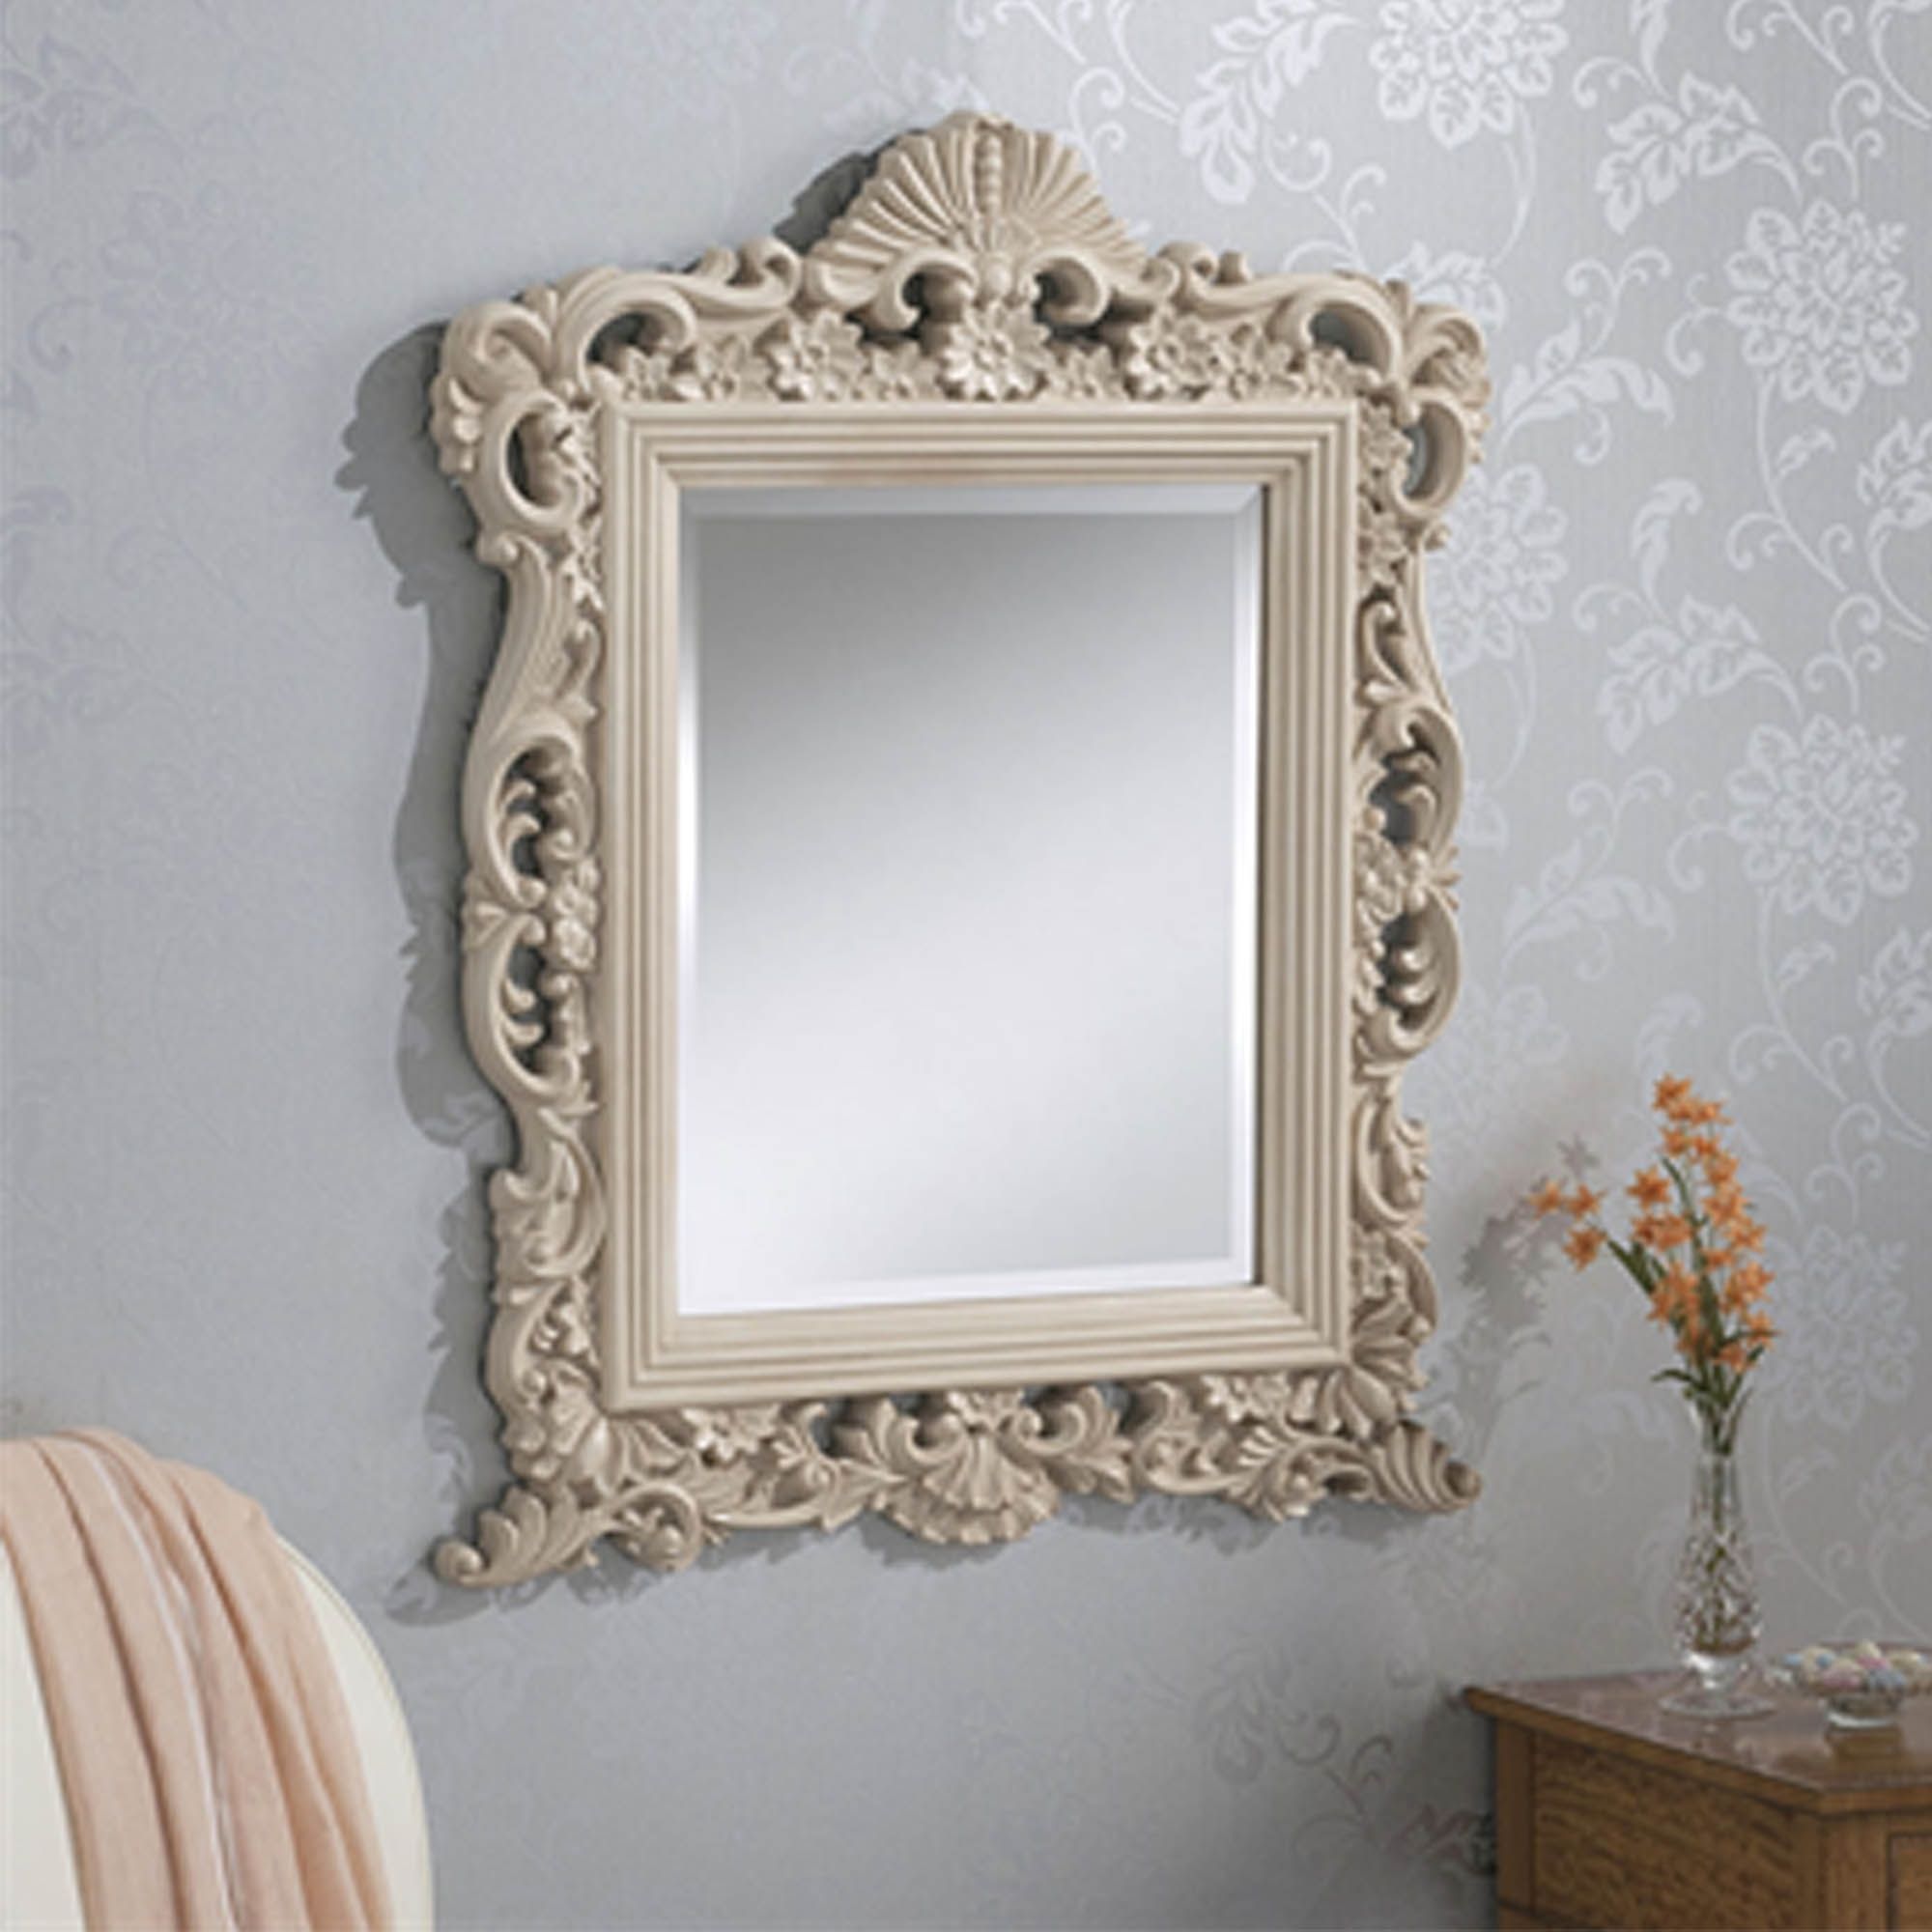 Decorative Antique French Style Ivory Ornate Wall Mirror | Hd365 In Booth Reclaimed Wall Mirrors Accent (Photo 9 of 15)